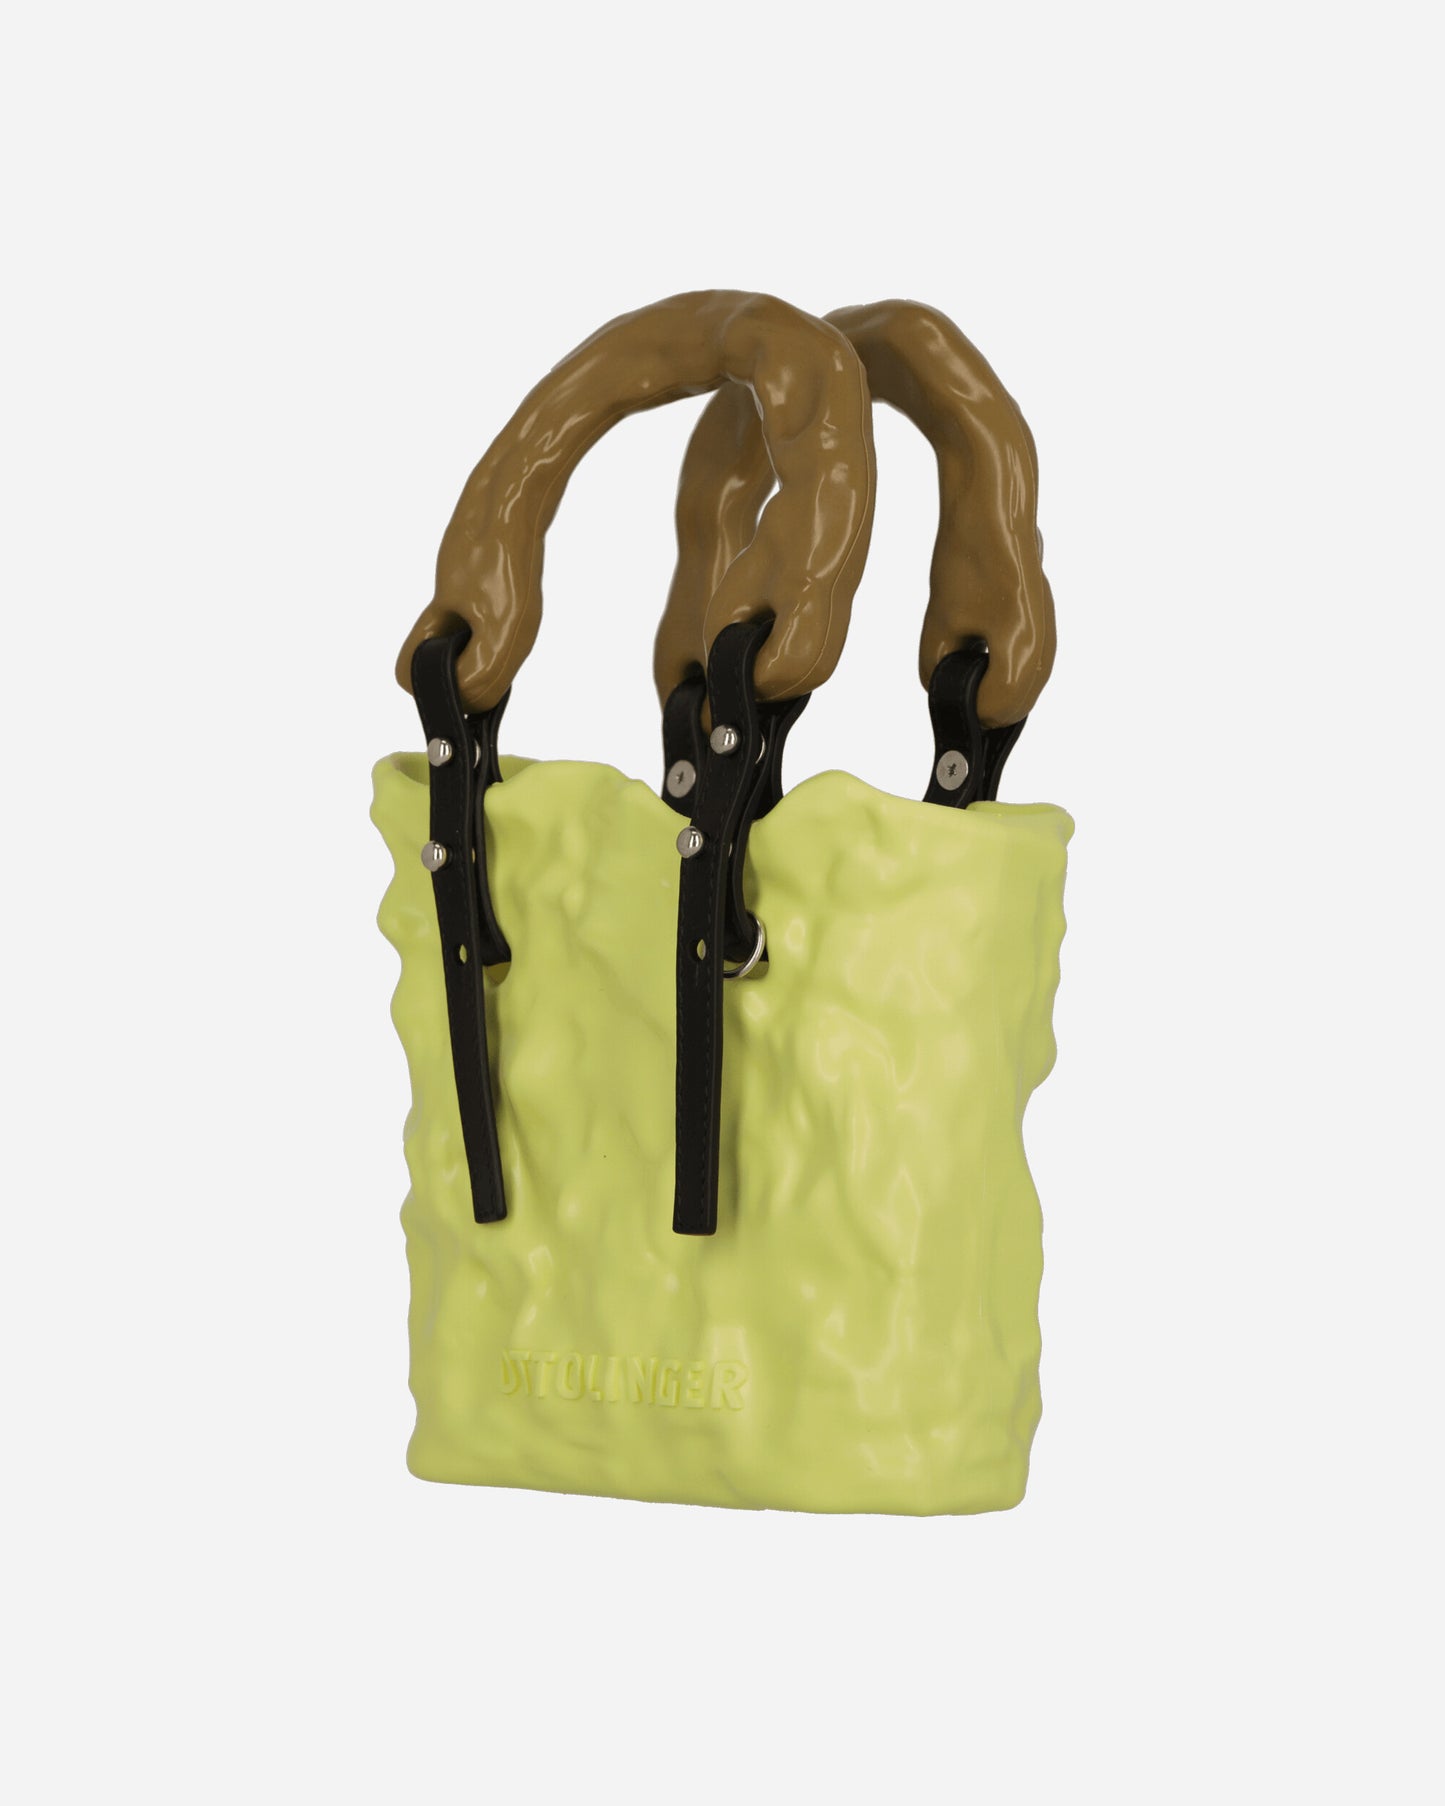 Ottolinger Wmns Signature Ceramic Bag Yellow Bags and Backpacks Tote Bags 2700902 YELLOW